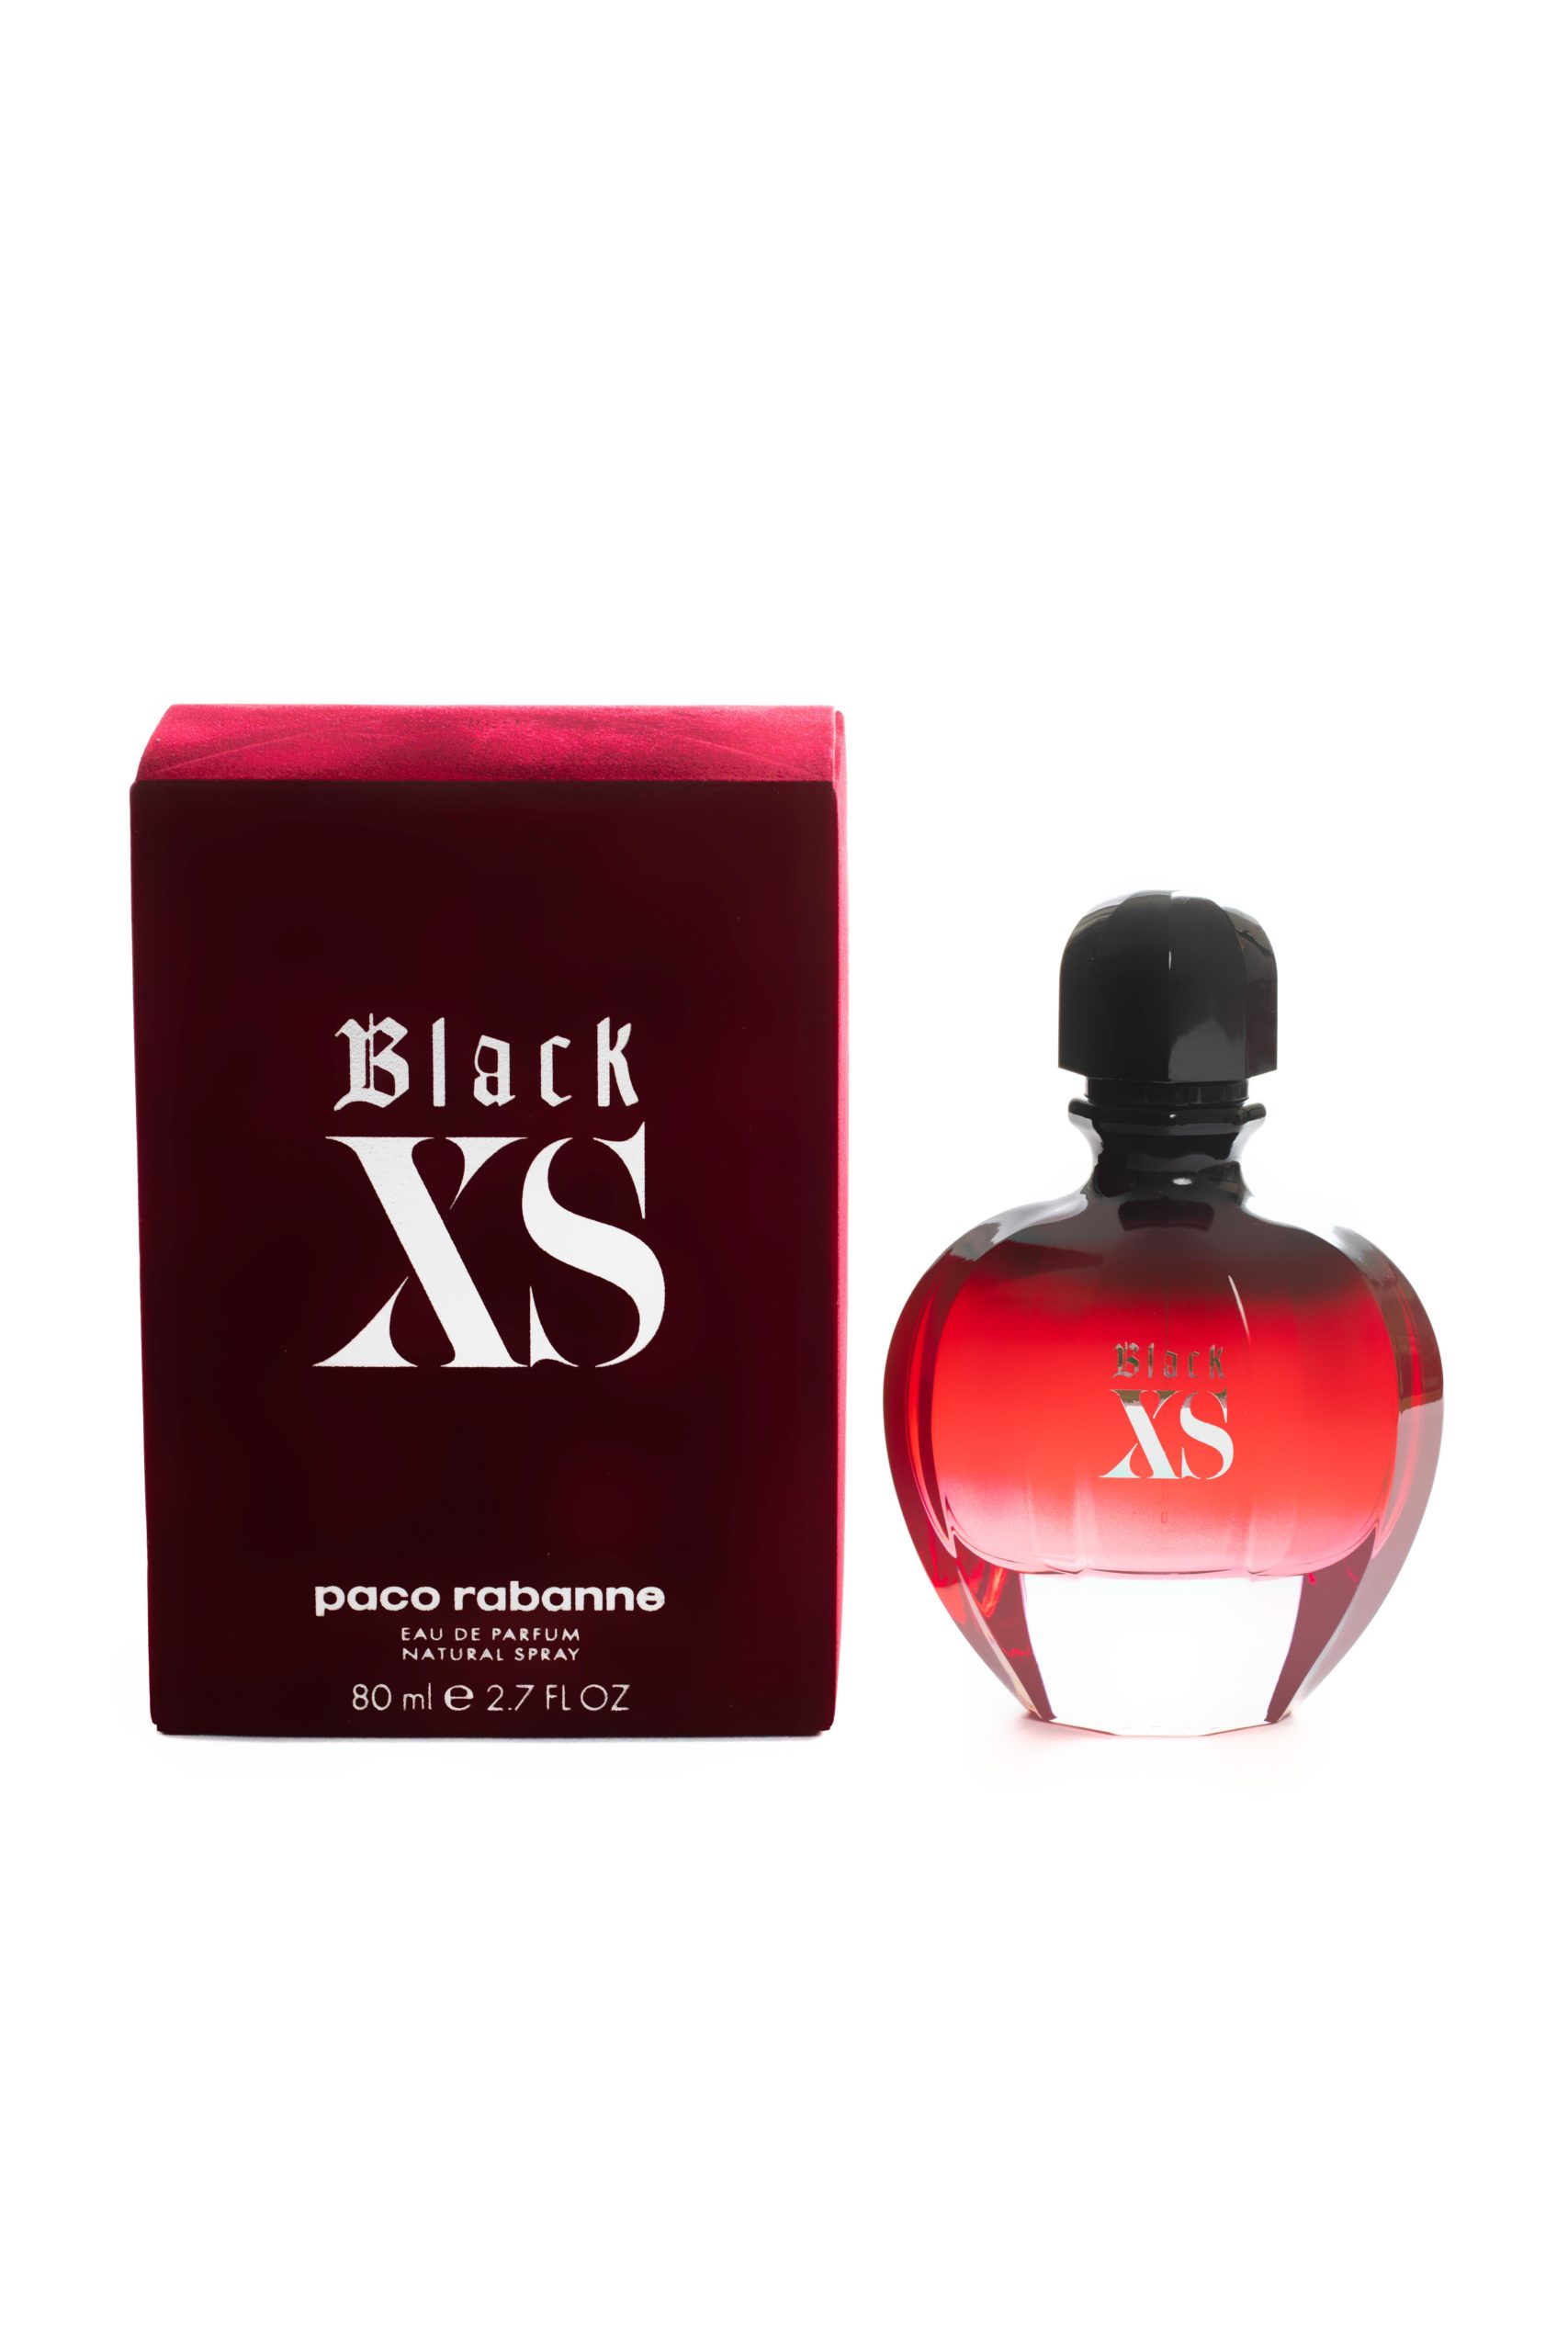 Paco rabanne black XS For her edp 80ml - Topx